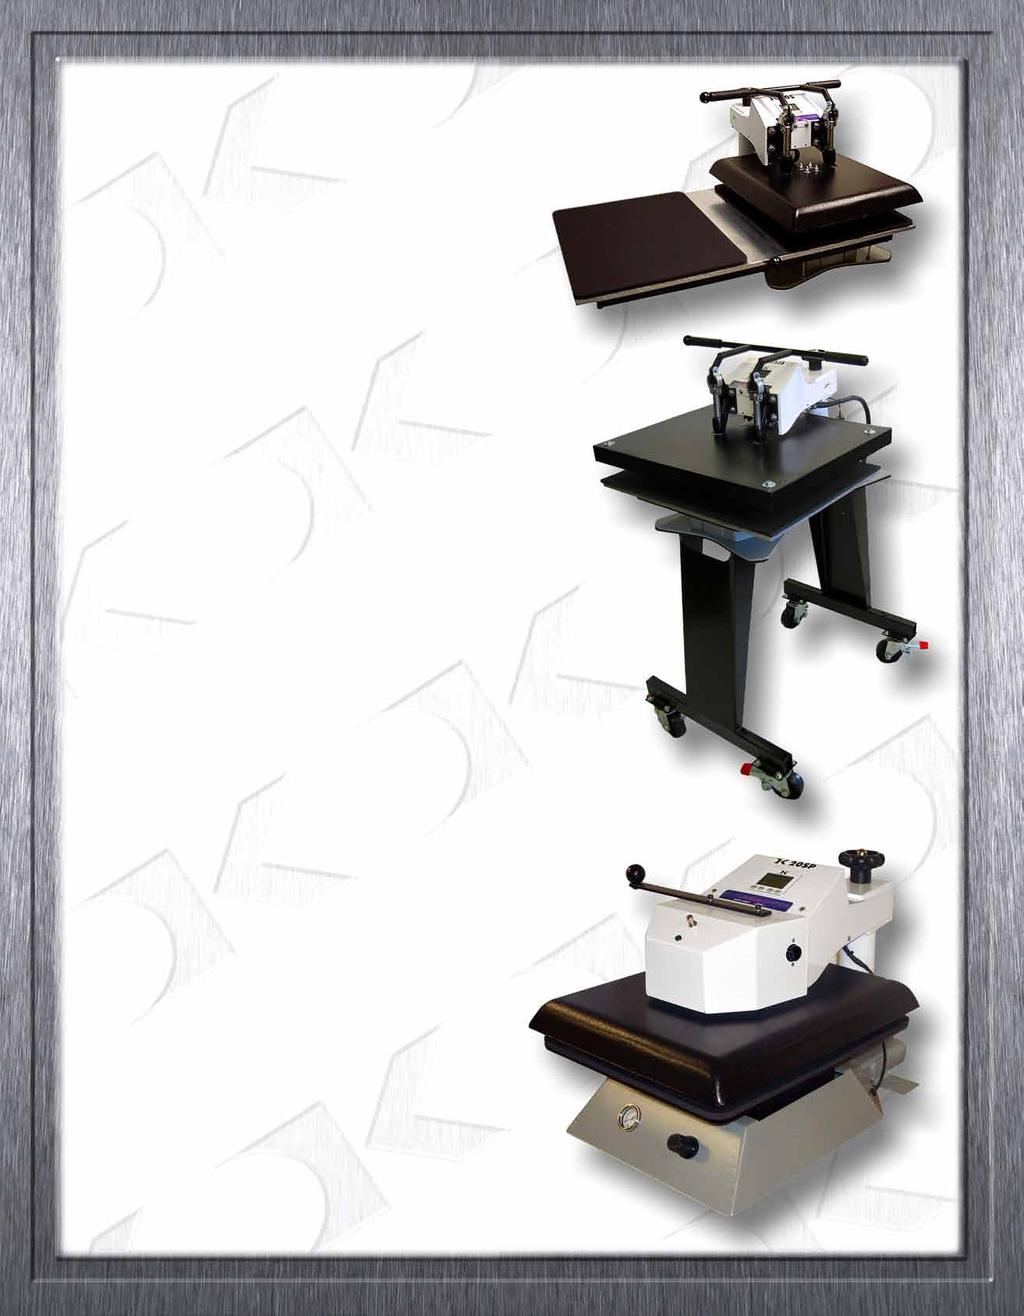 Due to the significant size increase of the platen, the DK25S 20 x25 swinger comes with a stand for extra secure stability, even when swung completely around 180.